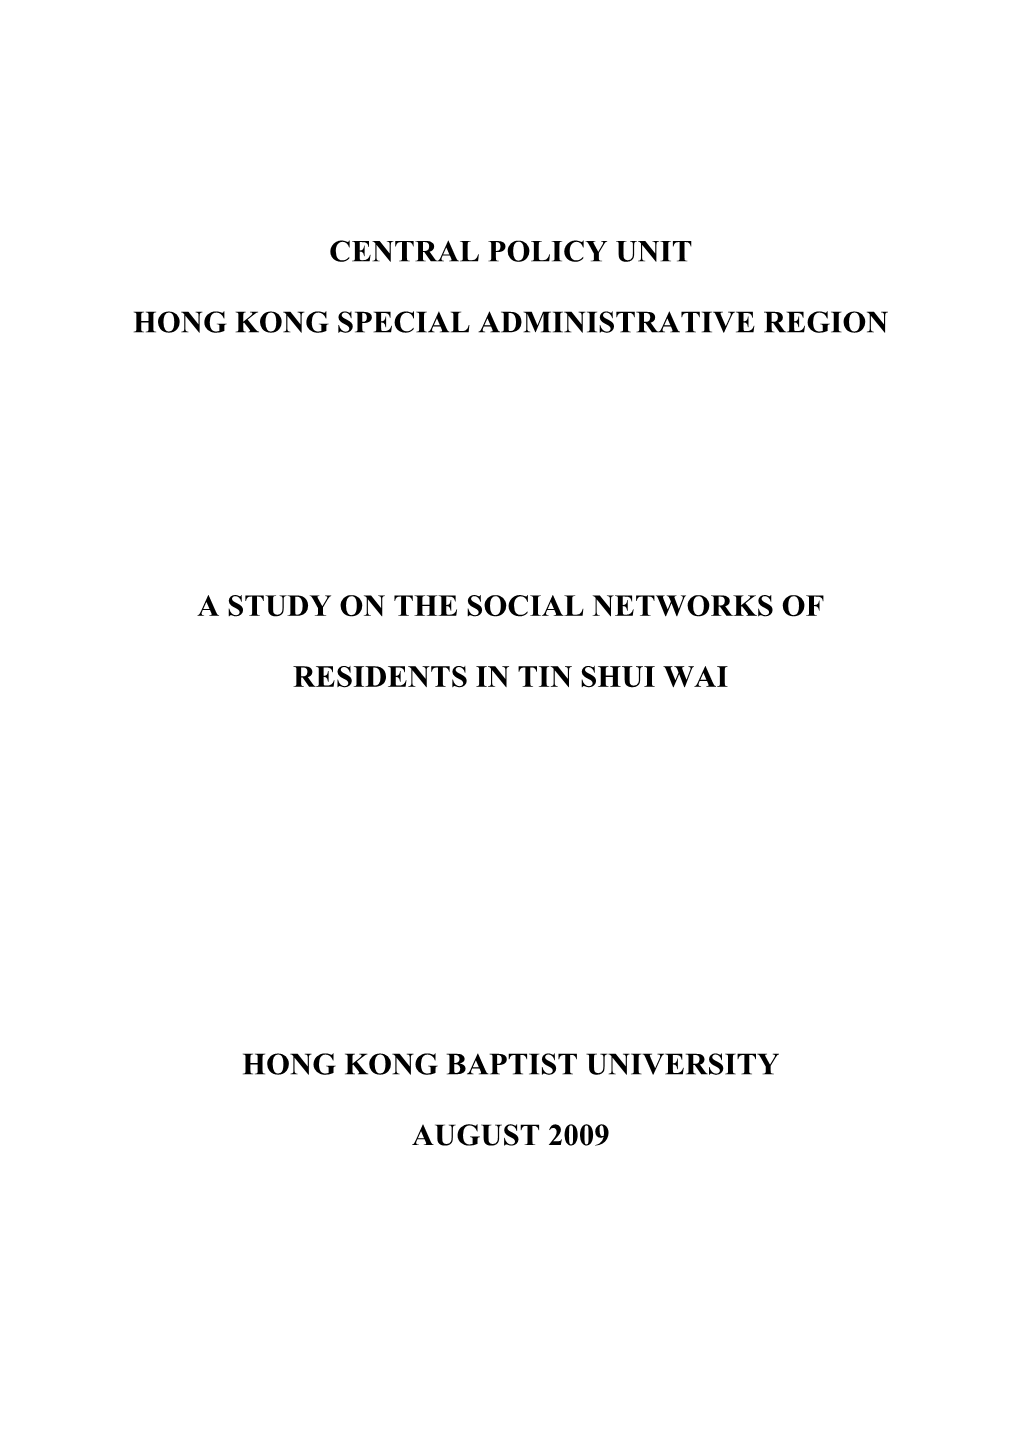 A Study on the Social Networks of Residents in Tin Shui